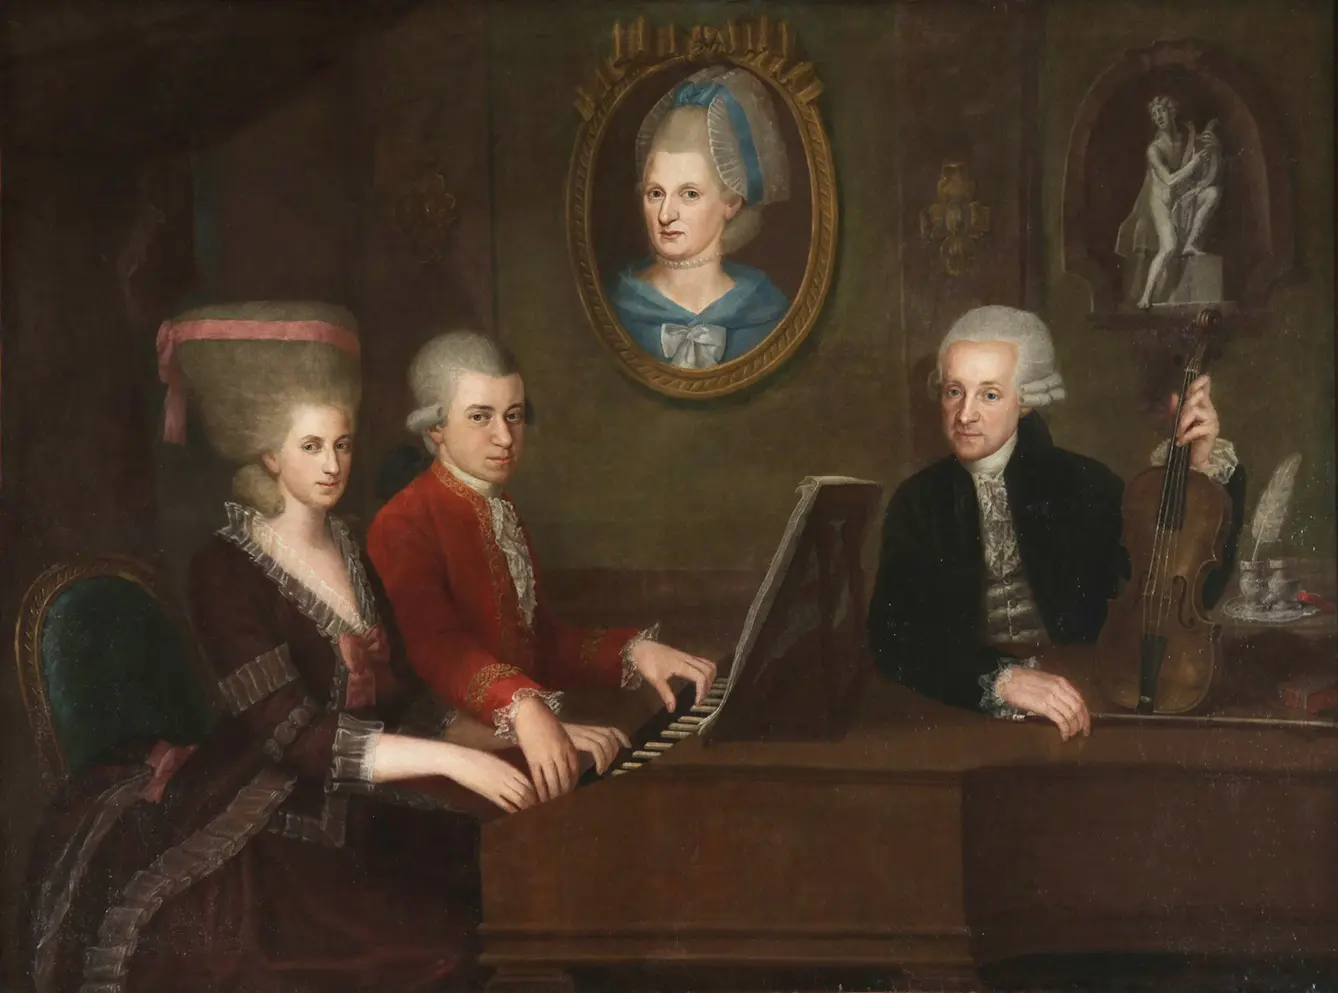 Mozart family, c. 1780. The portrait on the wall is of Mozart's mothe